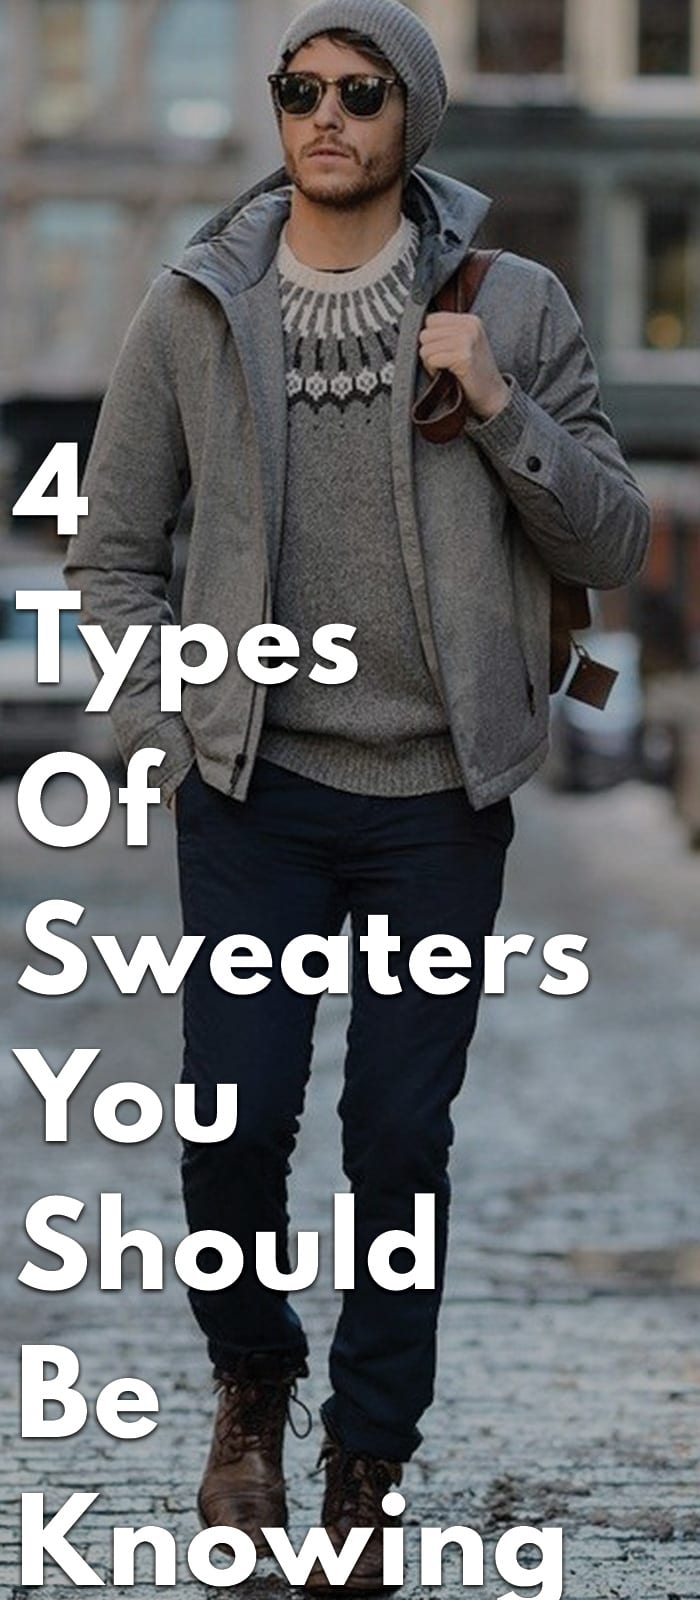 4-Types-Of-Sweaters-You-Should-Be-Knowing